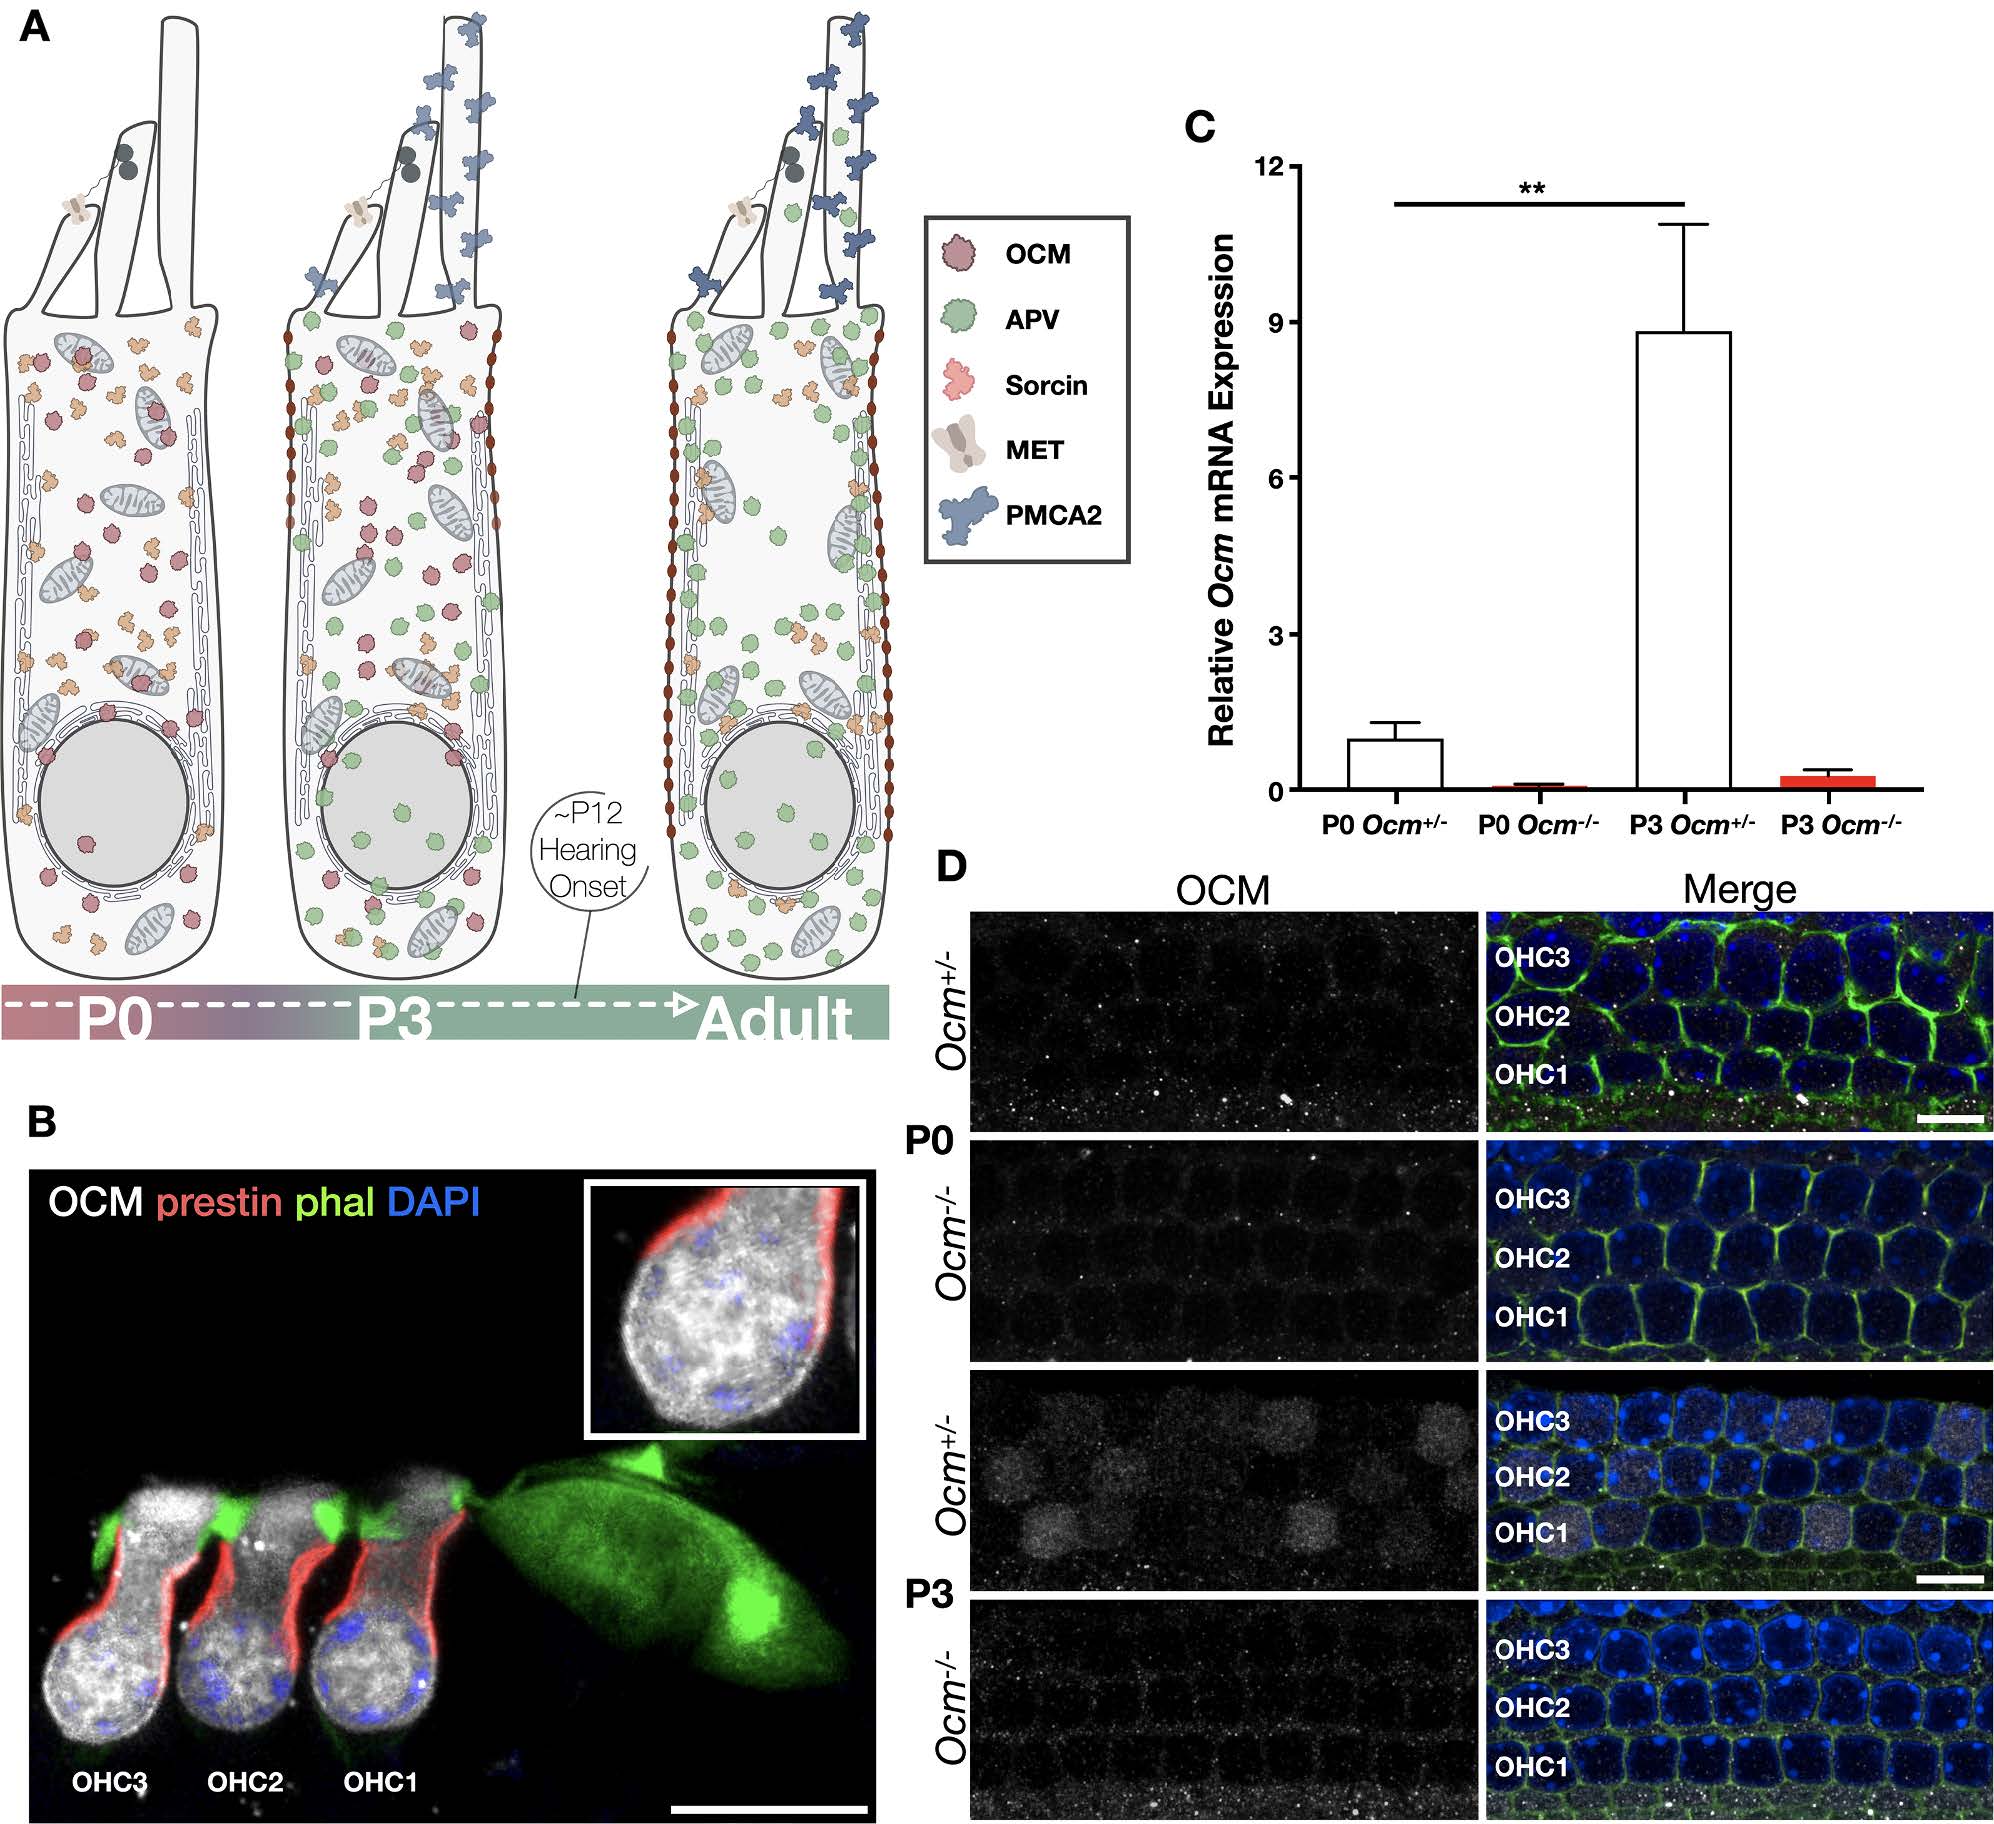 Oncomodulin (OCM) uniquely regulates calcium signaling in neonatal cochlear outer hair cells